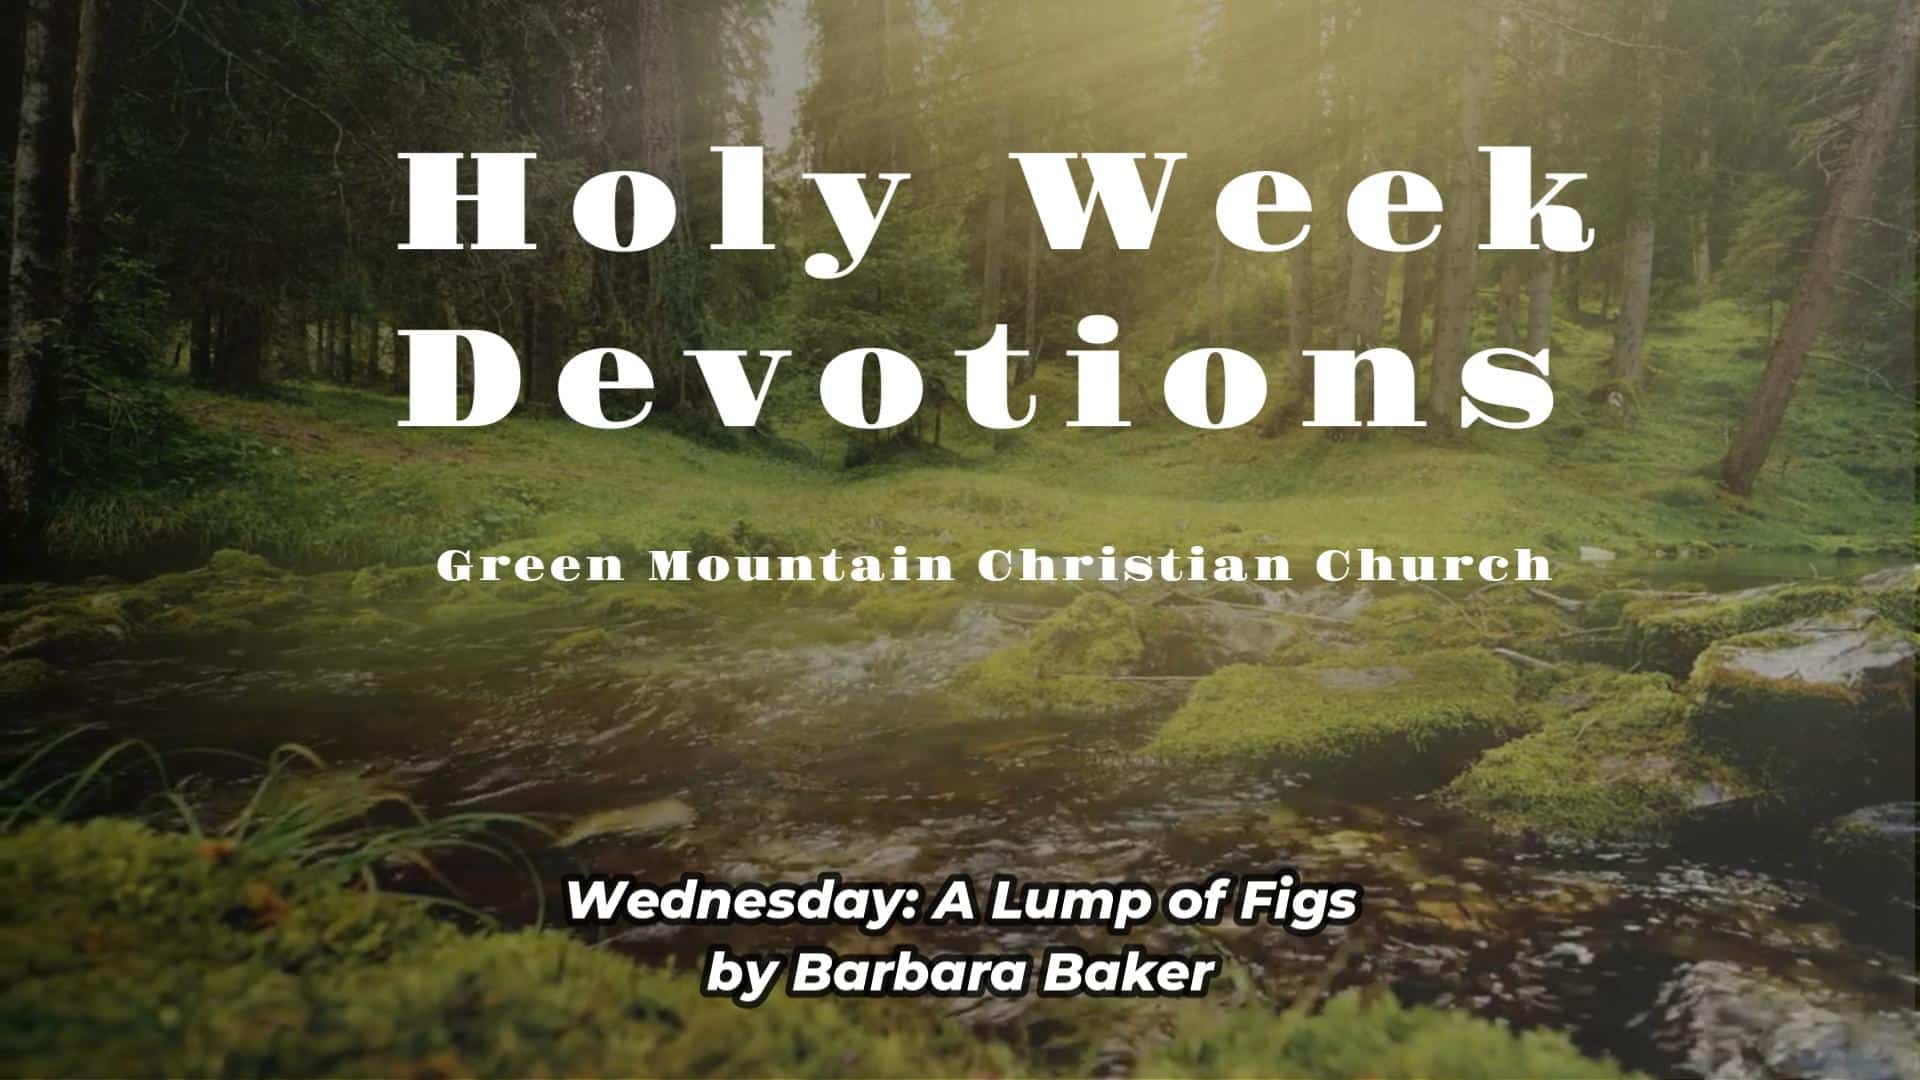 Caption reading "Easter Week Devotion - Green Mountain Christian Church - Wednesday - A Lump of Figs by Barbara Baker" set against a background image of a stream in a meadow.